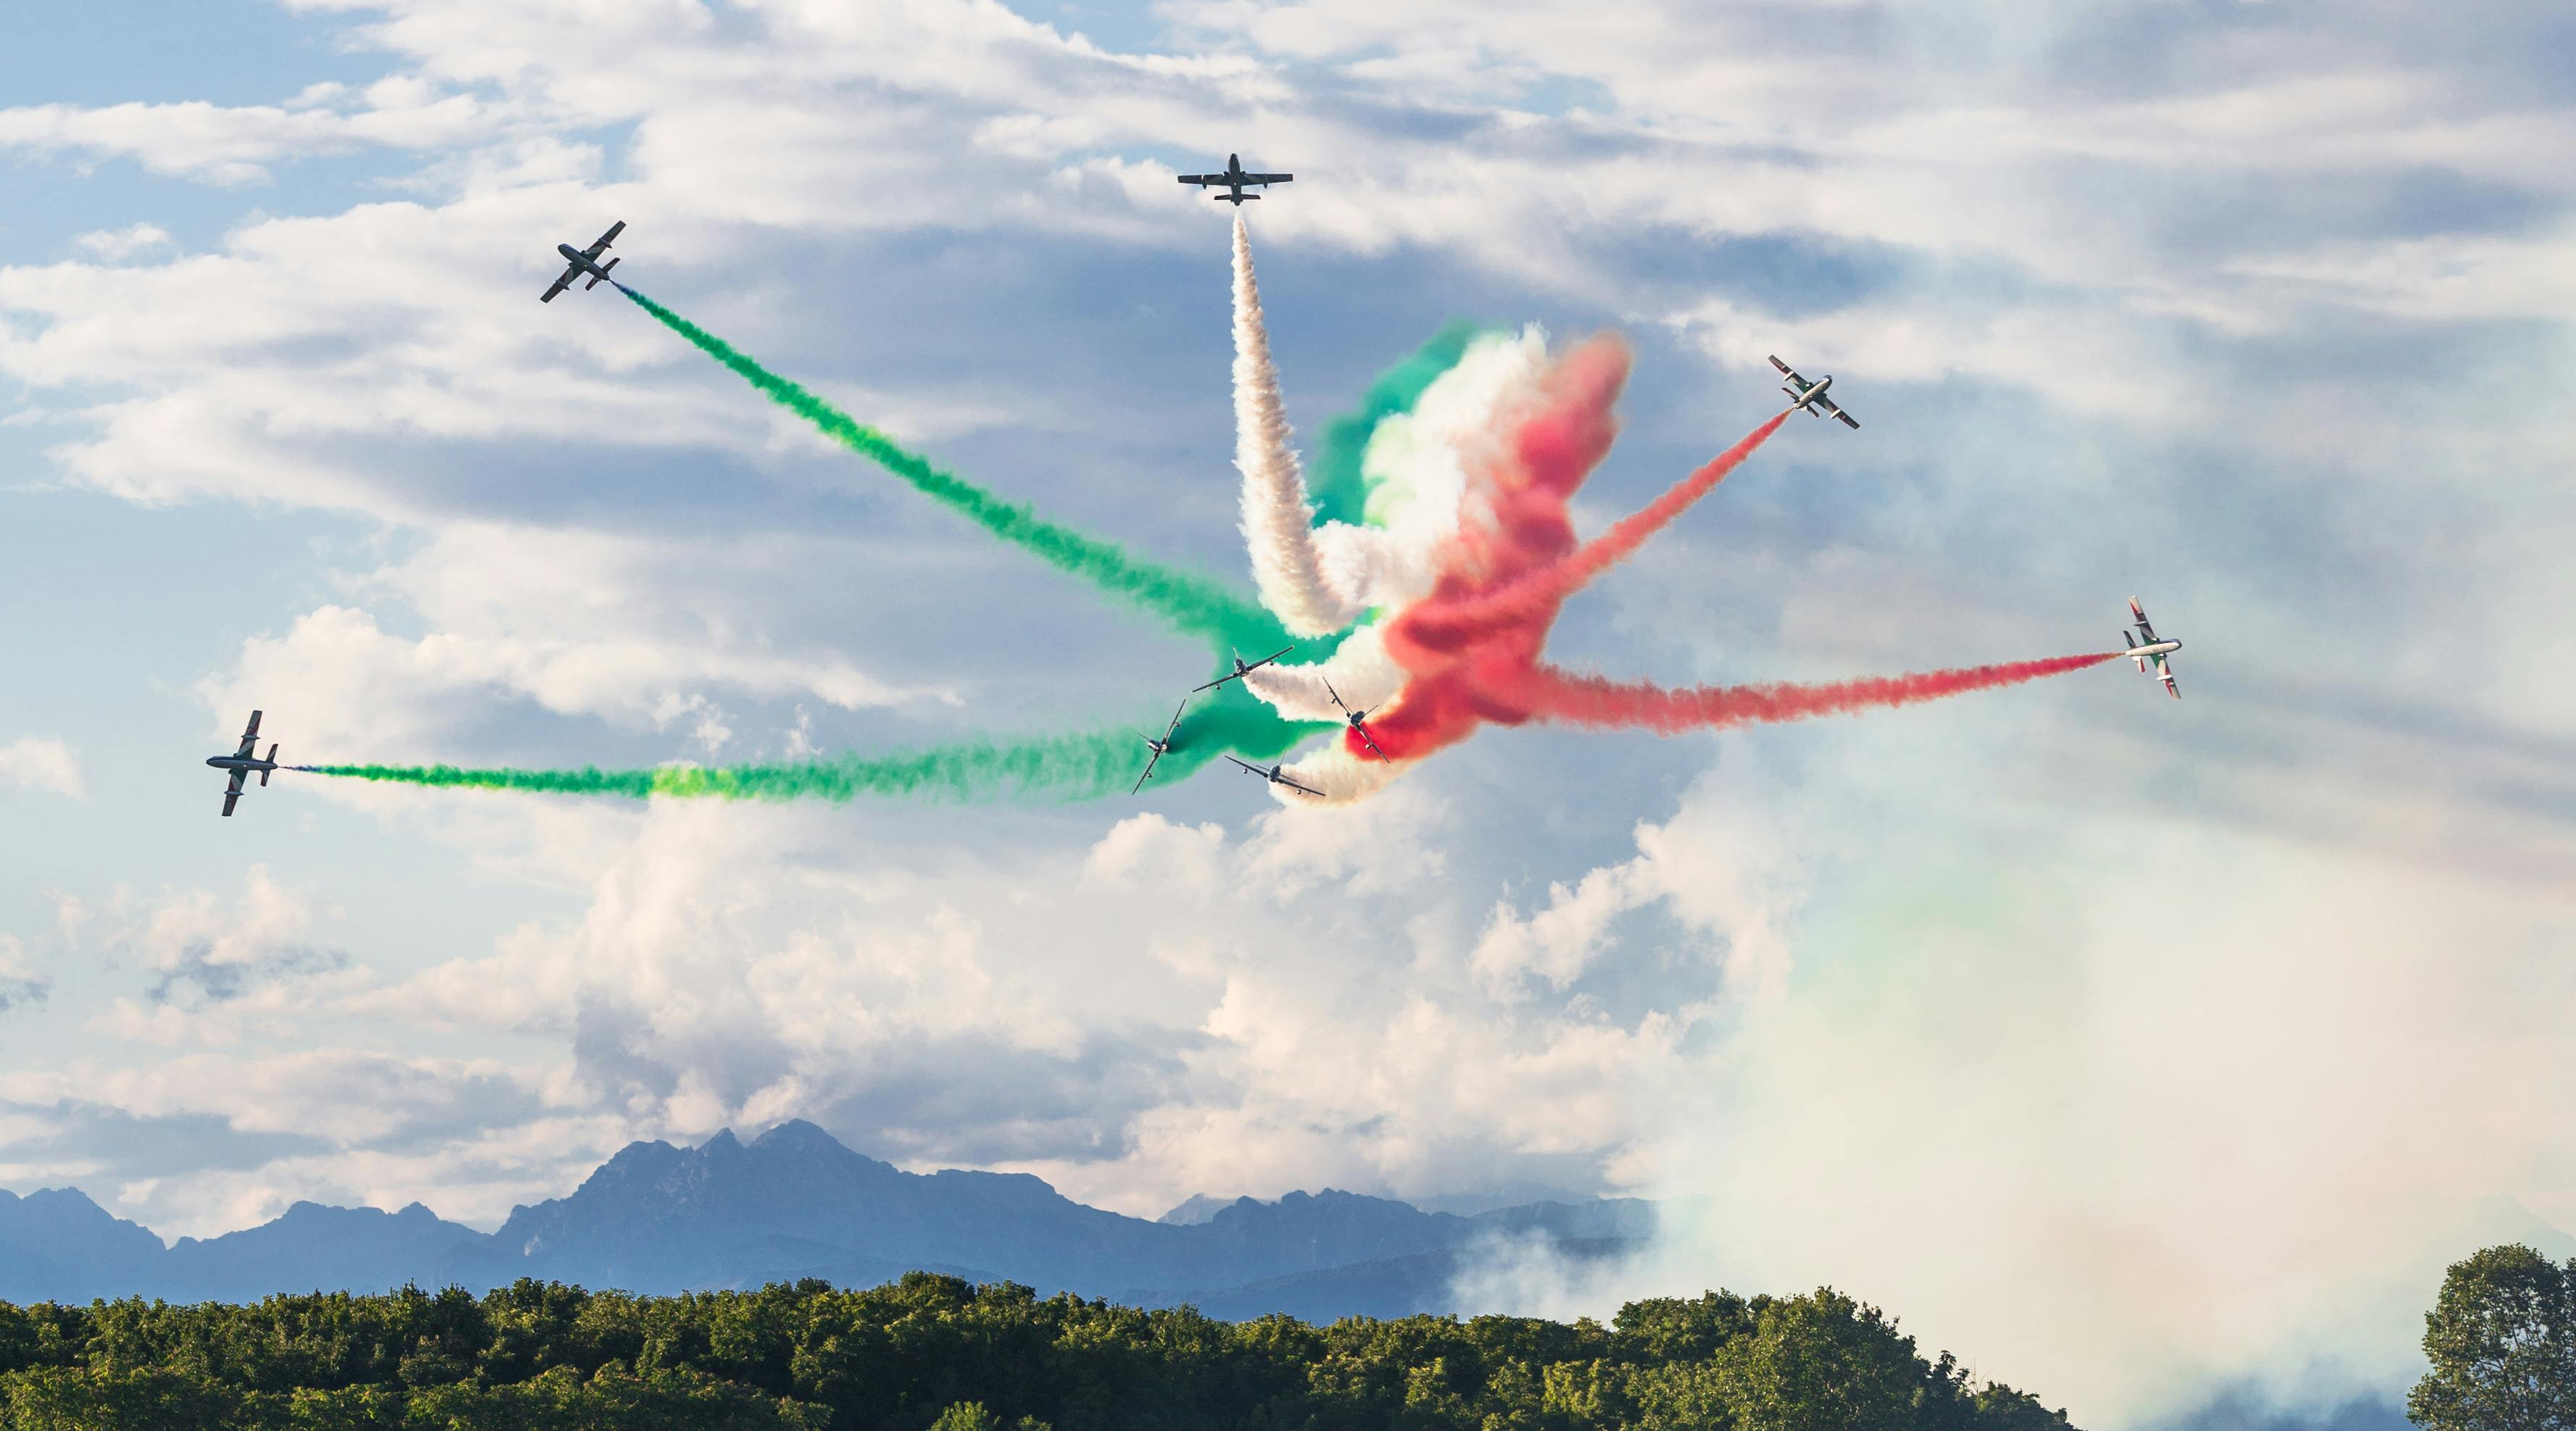 Colorful show with planes